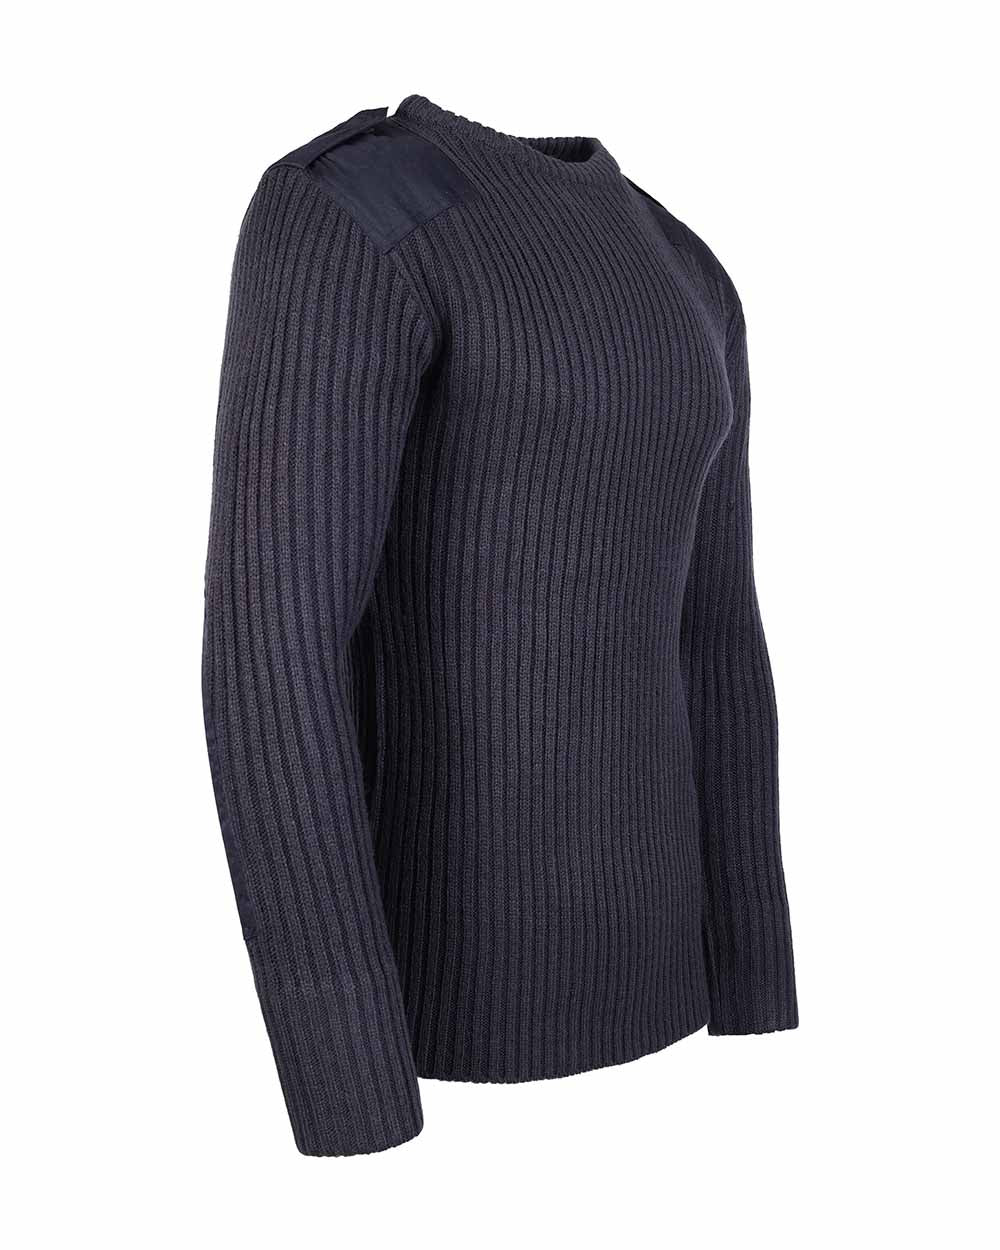 Navy Crew Neck Military Style Jumper by Fort 